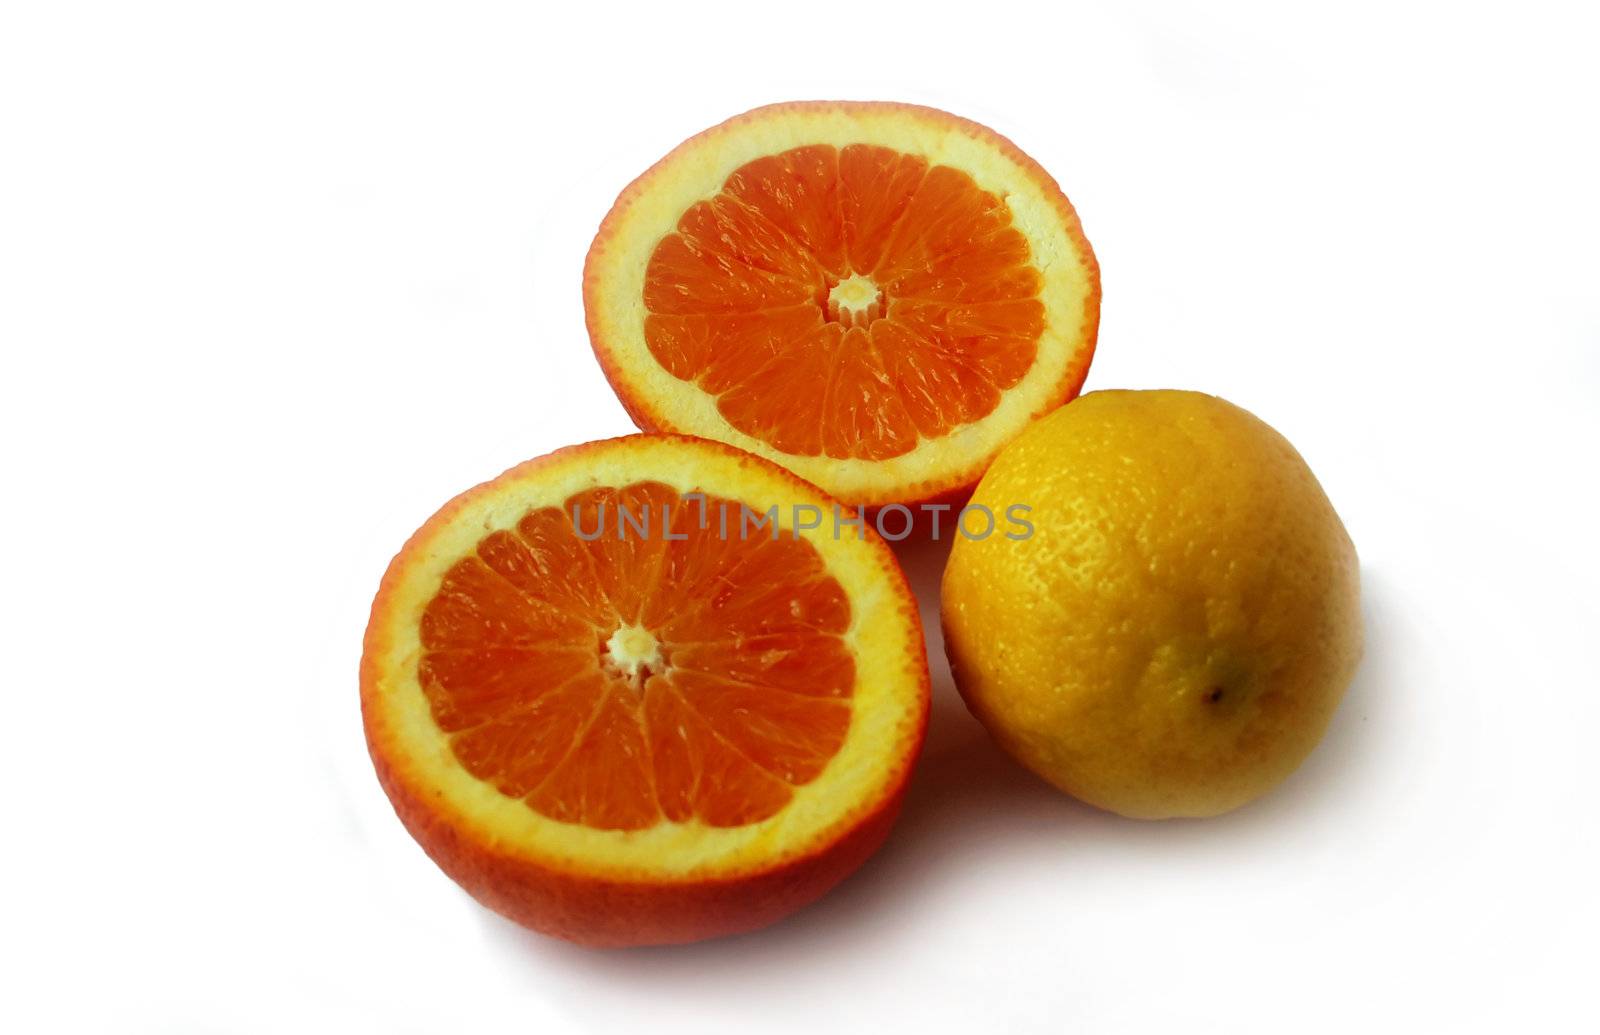 colored slices of orange and lemon with rough surface pattern isolated on white with shadows